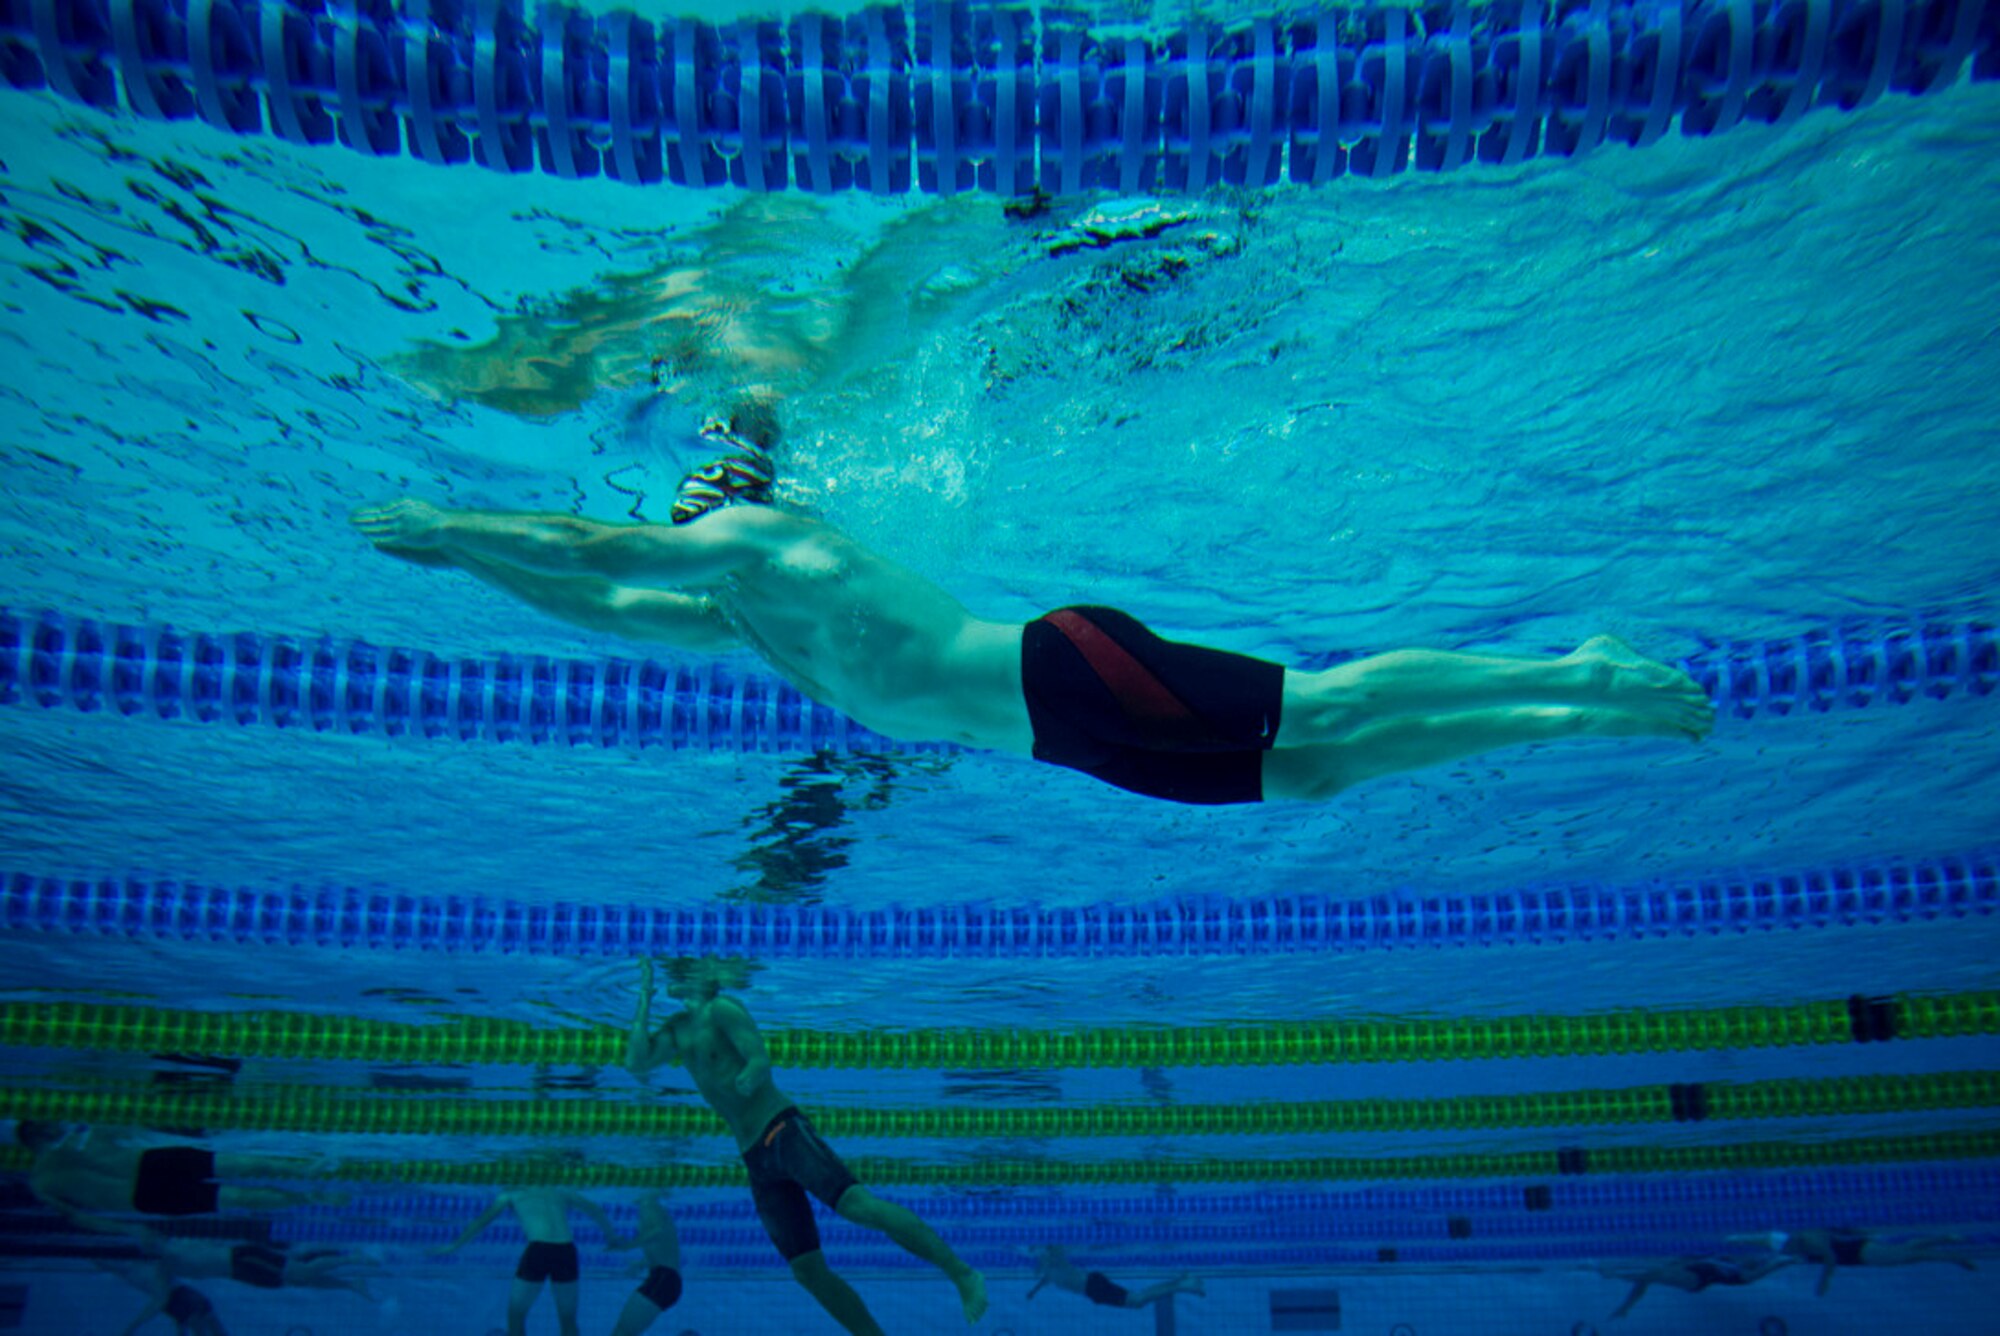 If you are going swimming, and are not a skilled swimmer, have the proper gear and always bring a buddy. It is best to not drink alcohol while swimming, as it impairs your cognitive and reactive skills. Also, it doesn’t hurt to know basic Cardiopulmonary Resuscitation (CPR) procedures. You could help save a life by knowing what to do and by keeping an eye out for everyone around you. You may see something that others don’t.